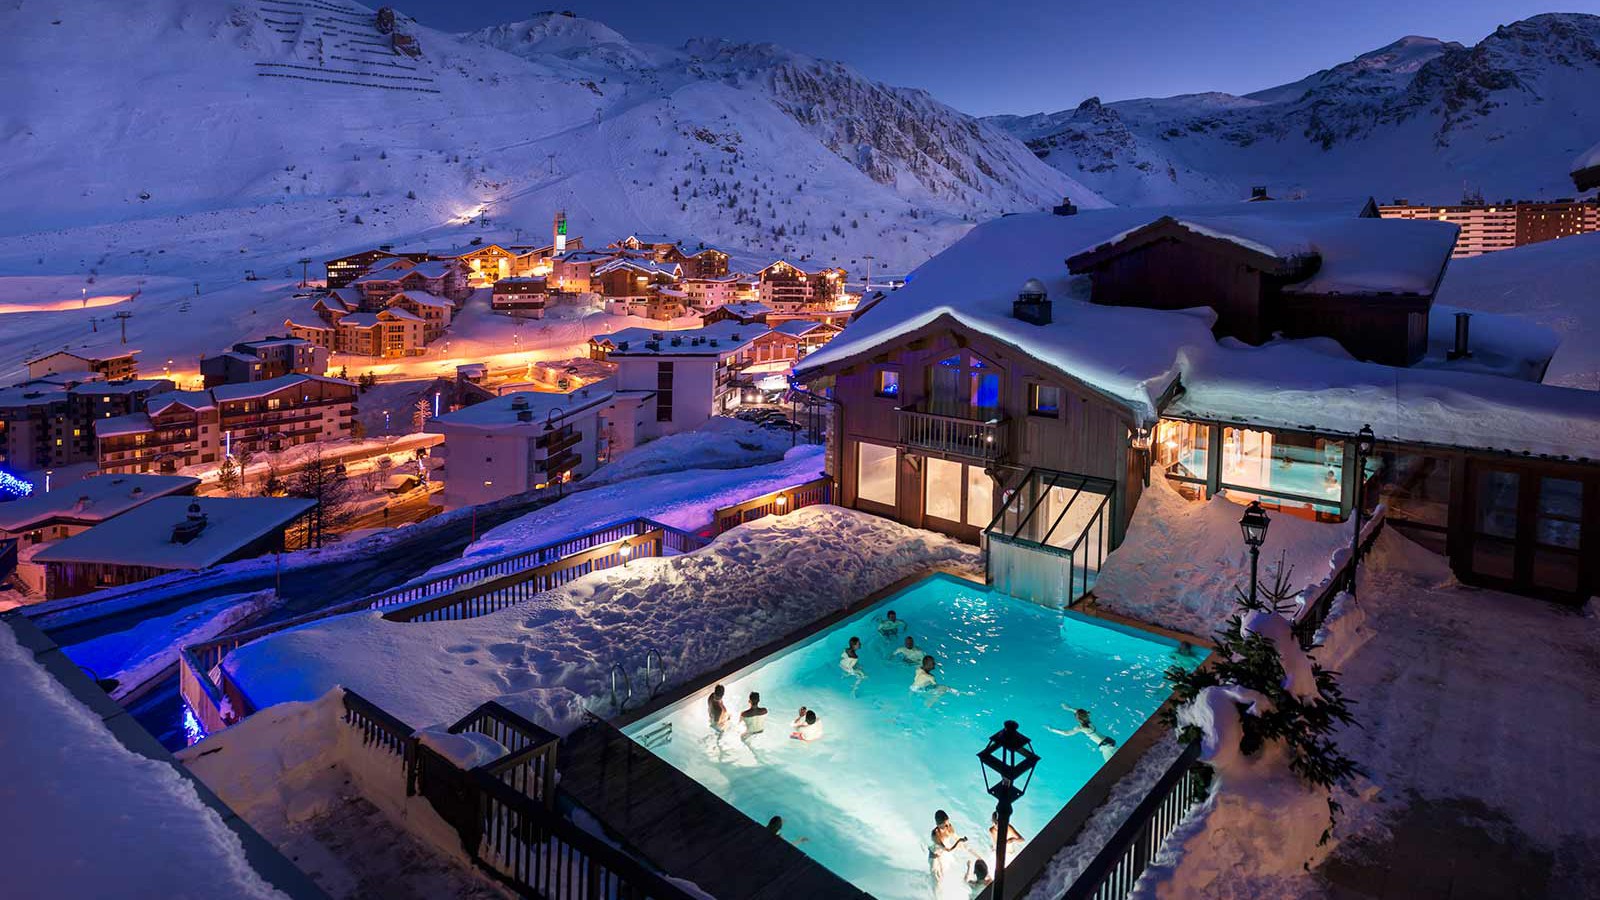 Ski Resorts With Heated Pools - Warm Up After A Day On The Slopes